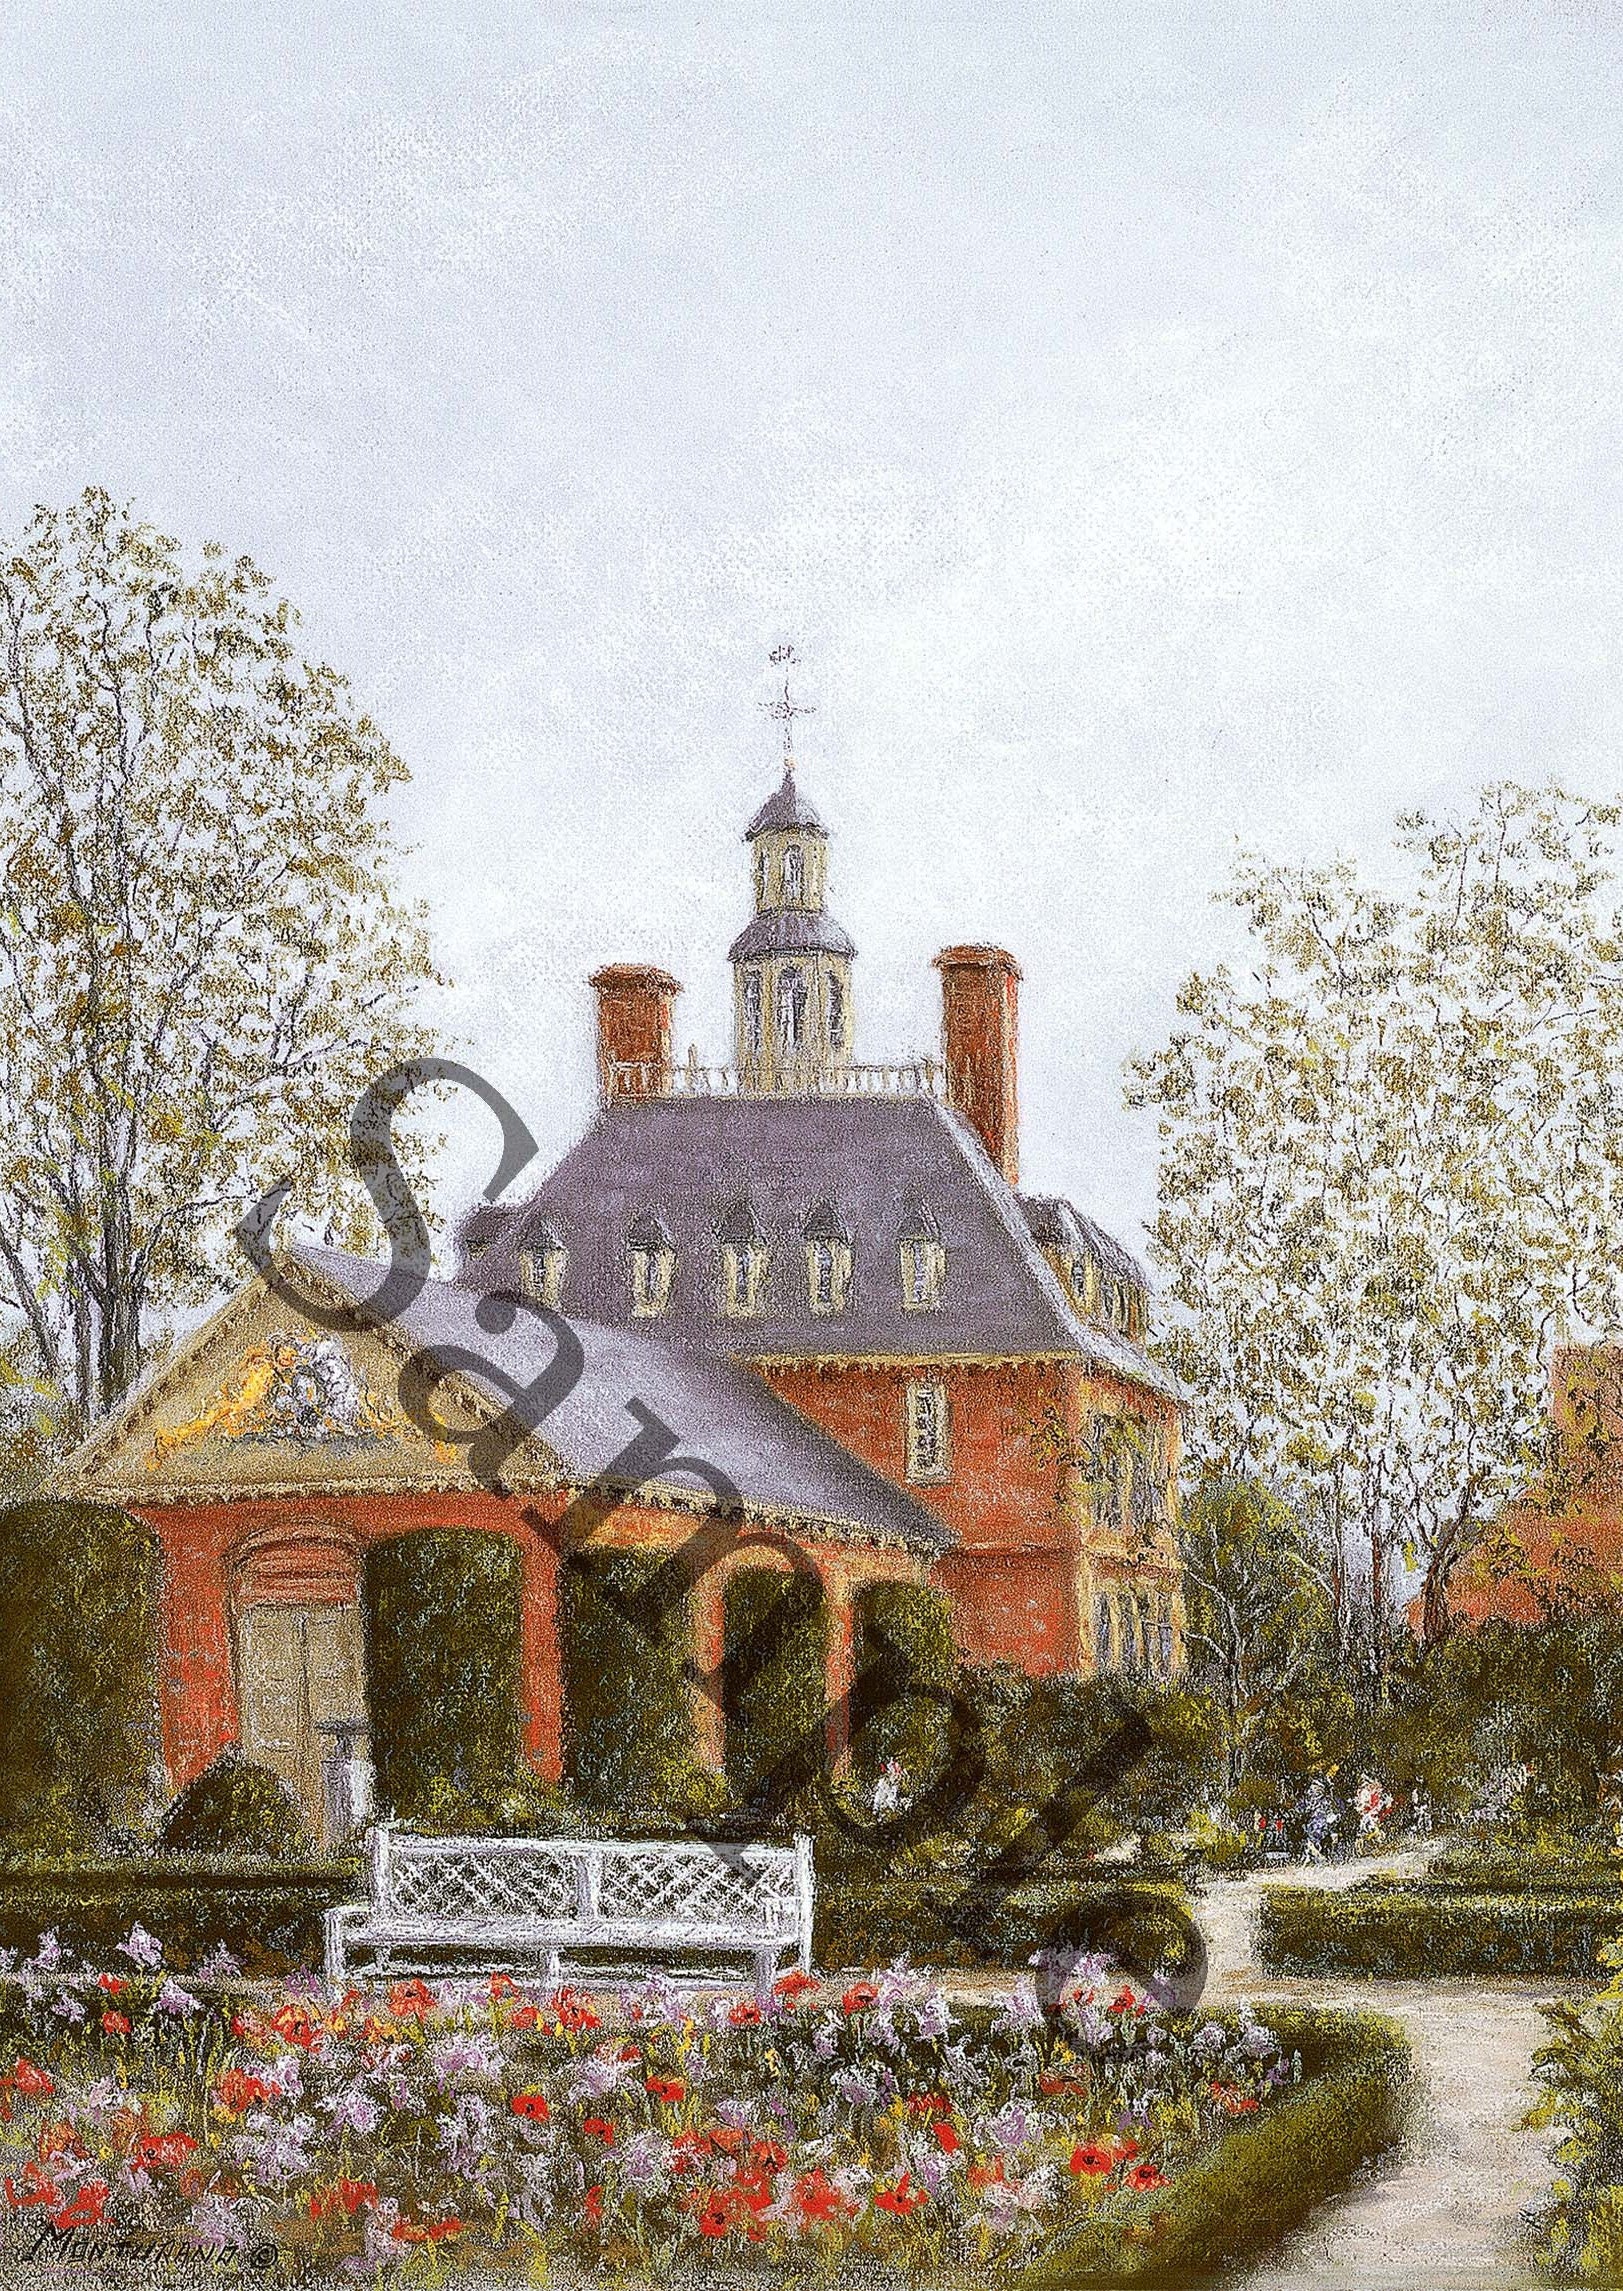 Colonial Williamsburg Prints the Governor's Palace - Etsy